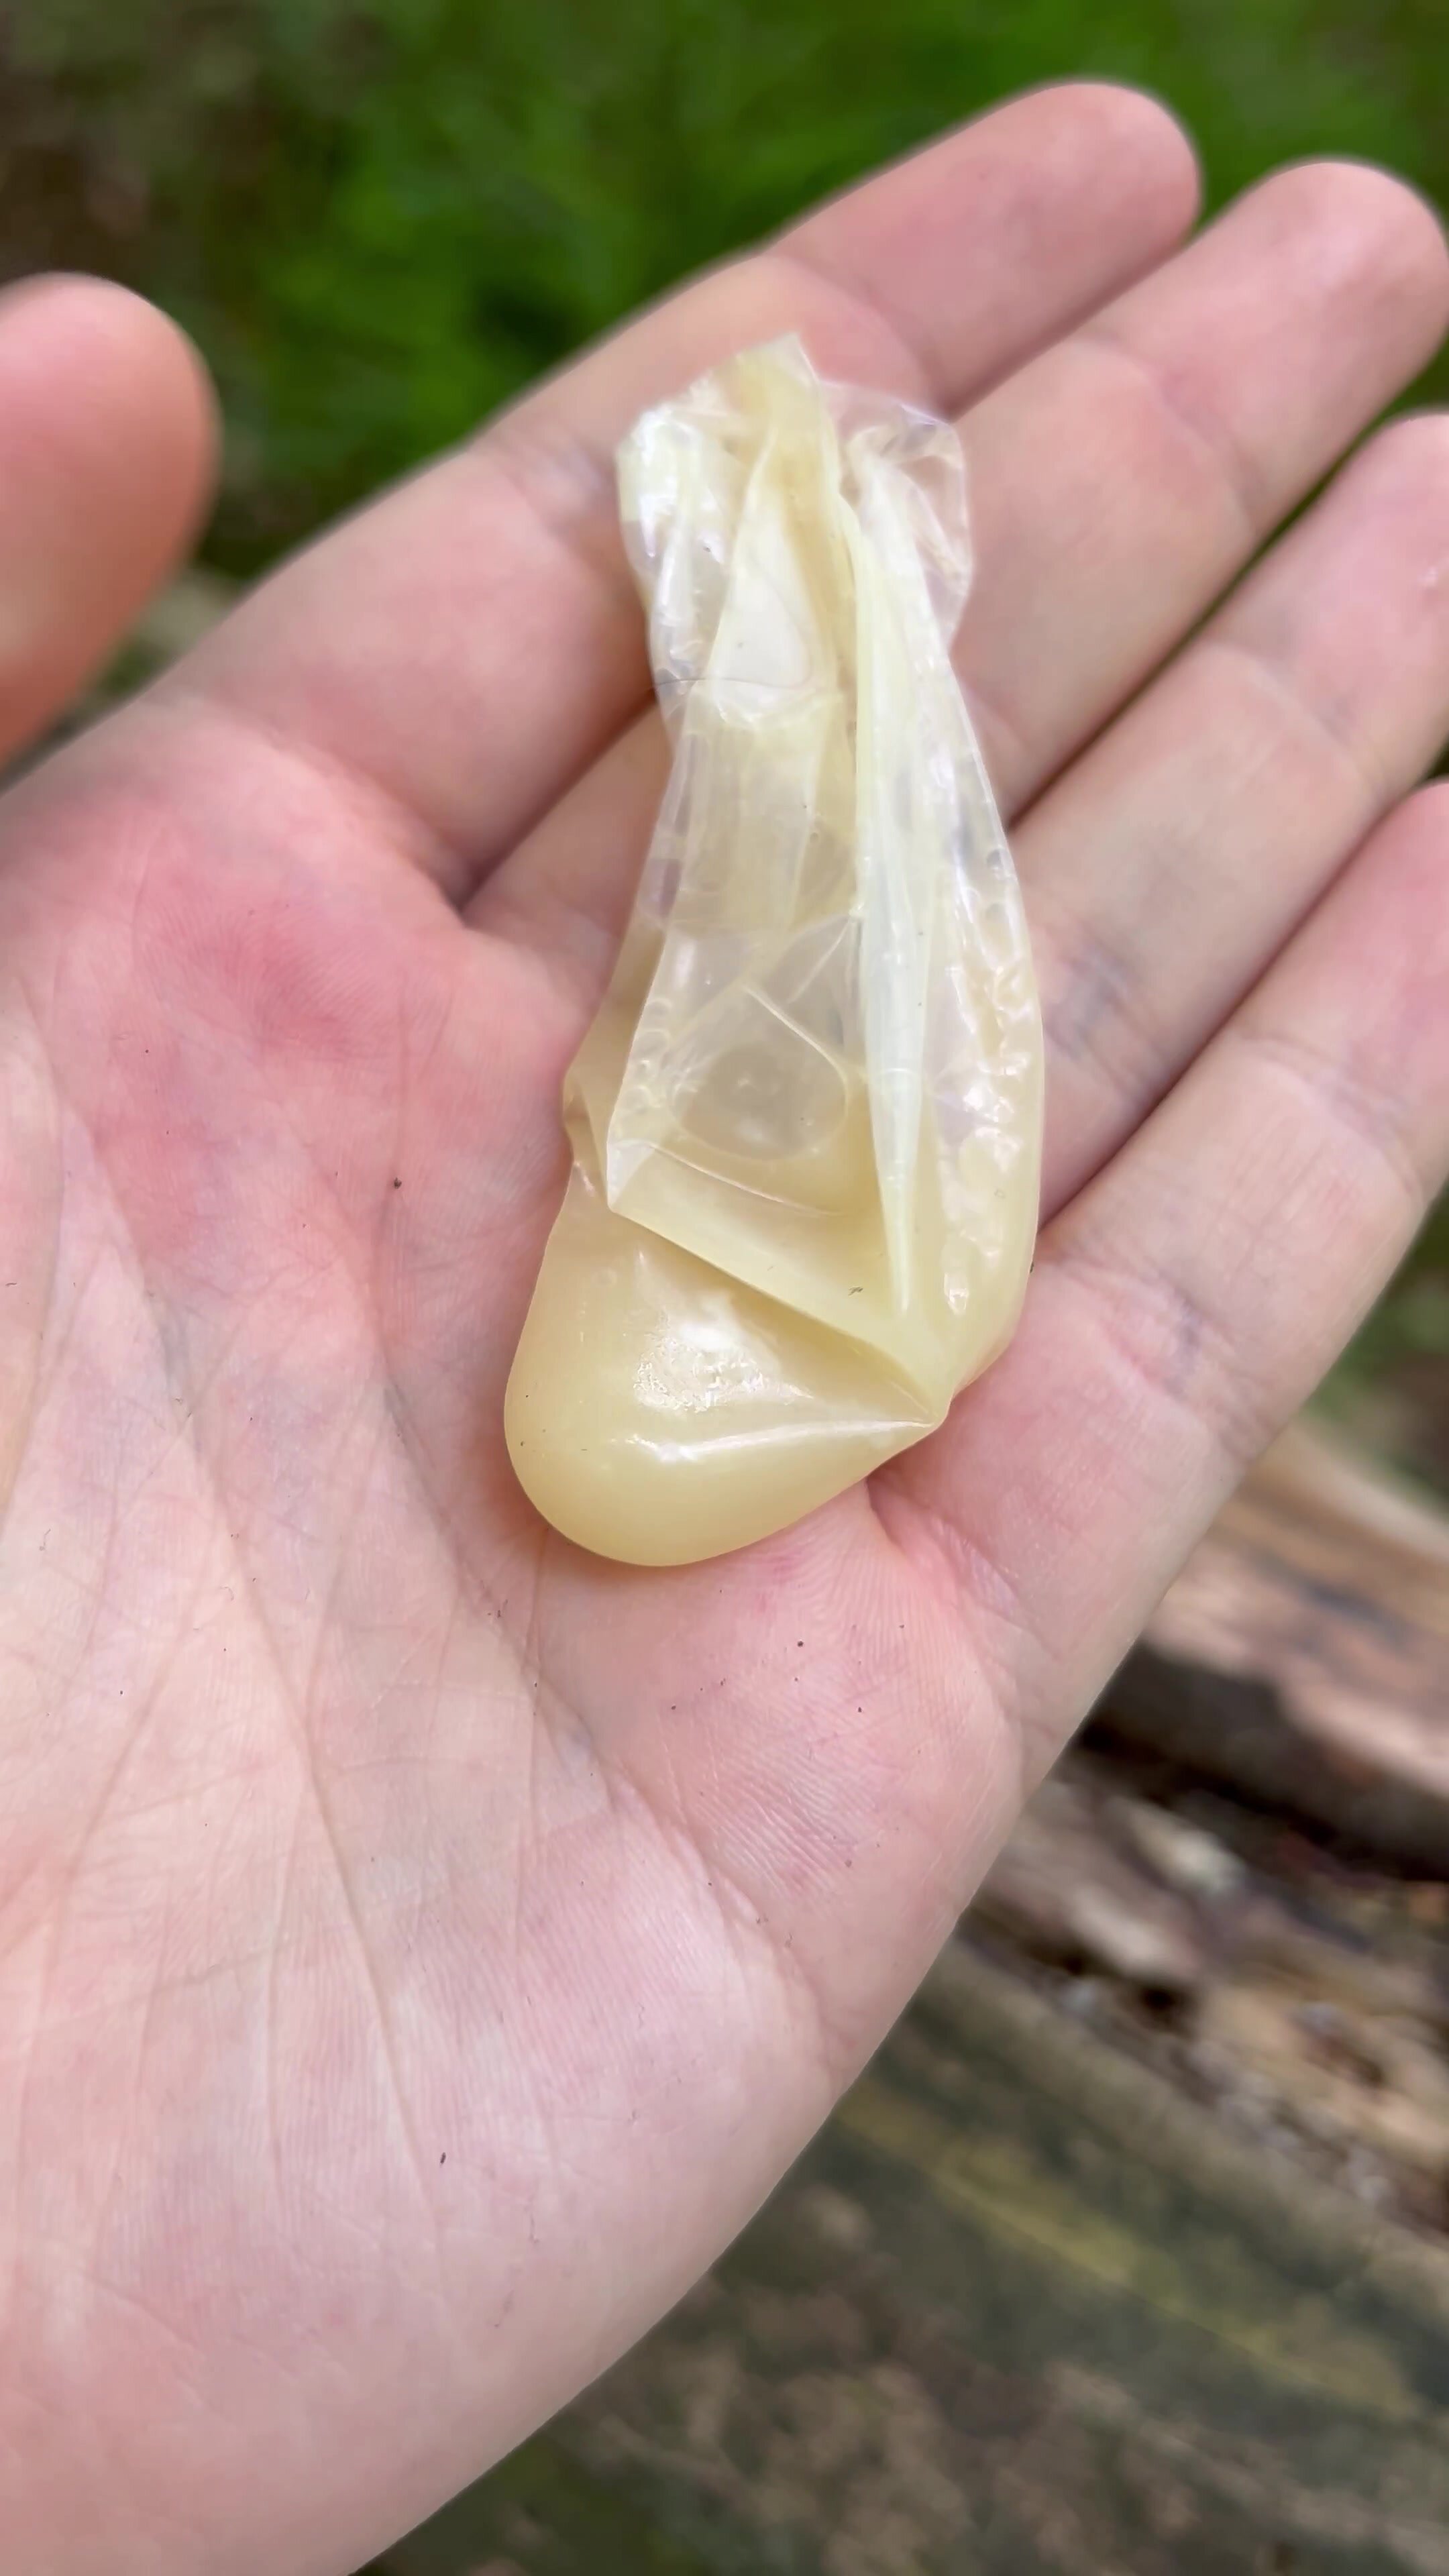 Used condom in forest